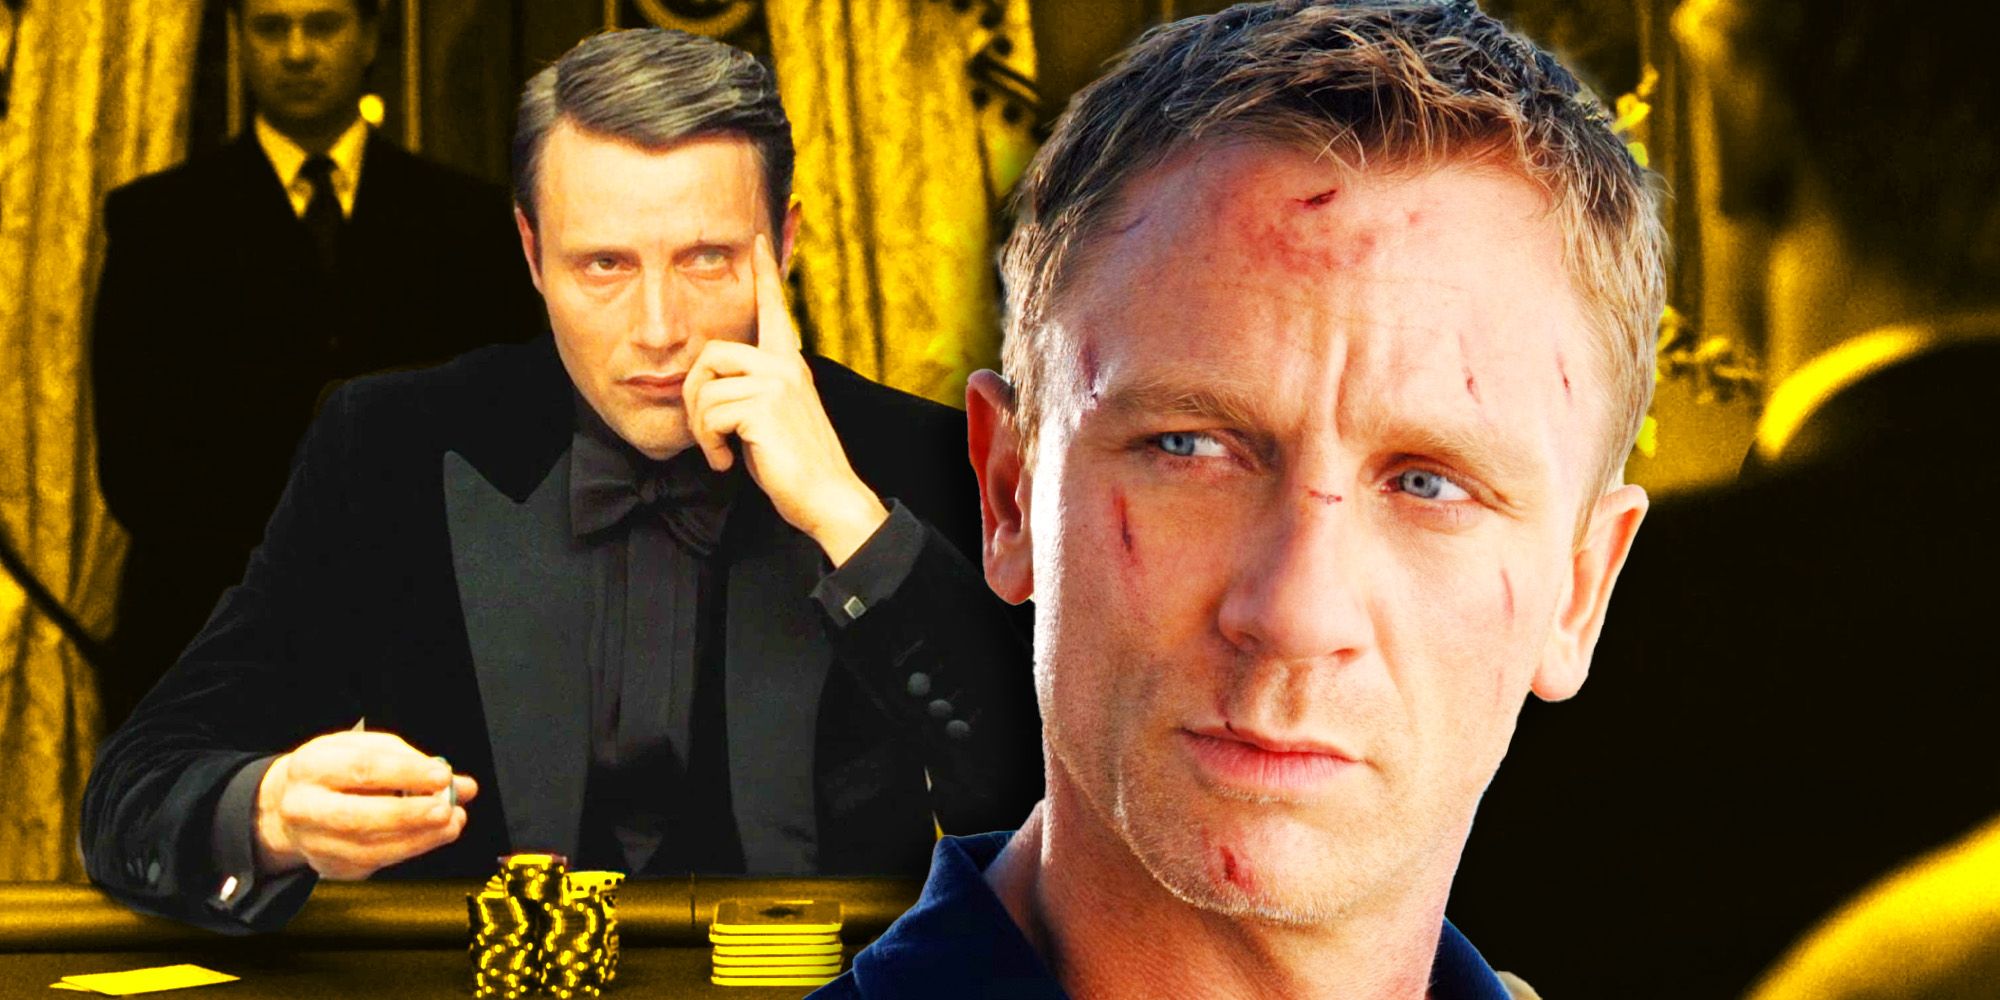 Mads Mikkelsen as Le Chiffre and Daniel Craig as James Bond in Casino Royale